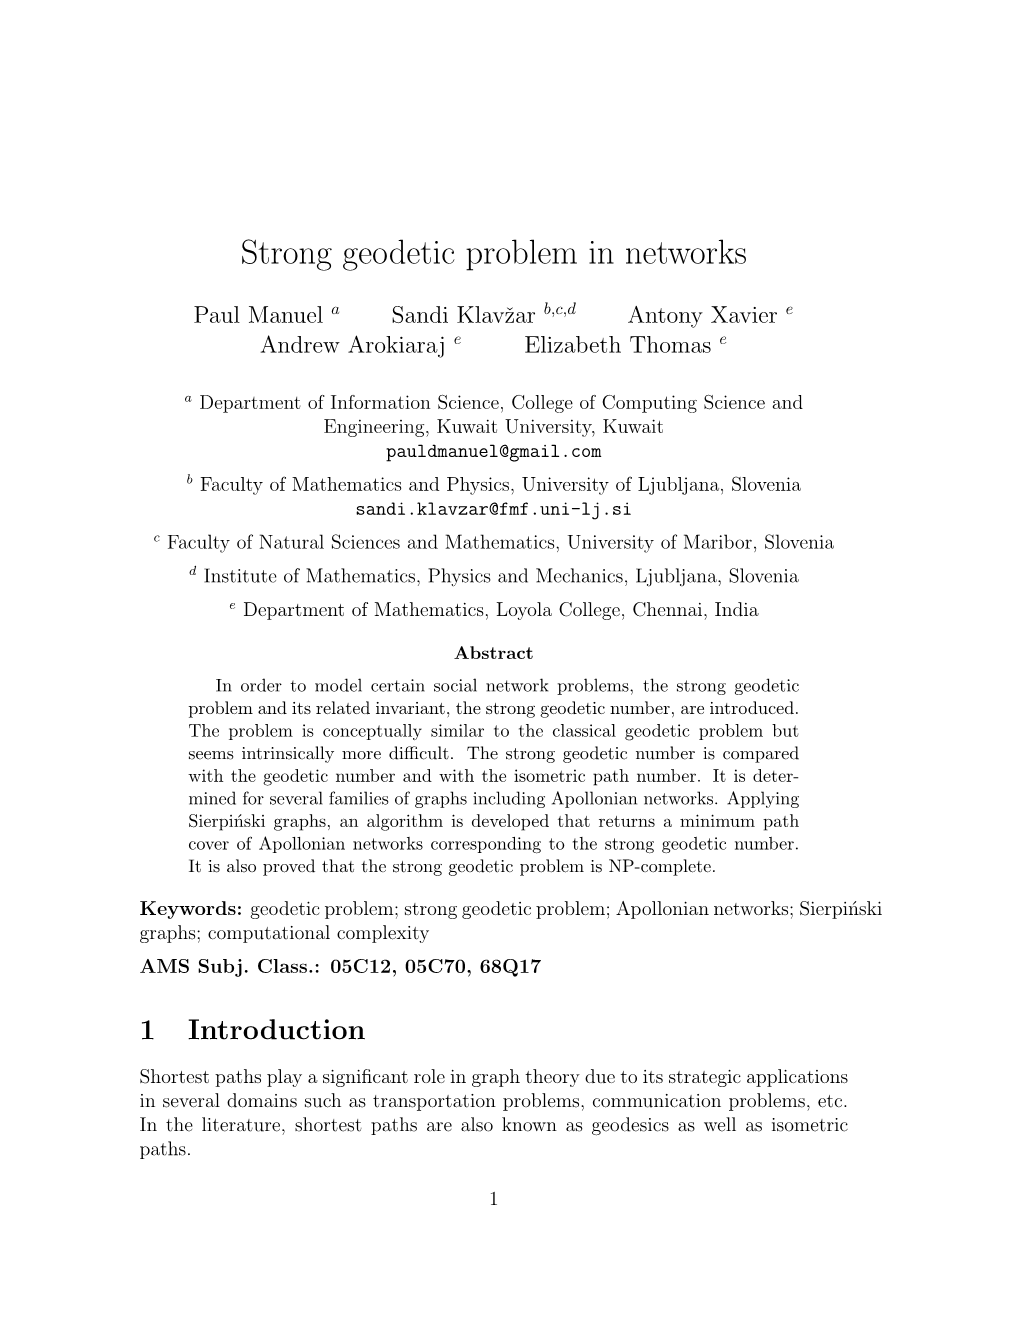 Strong Geodetic Problem in Networks